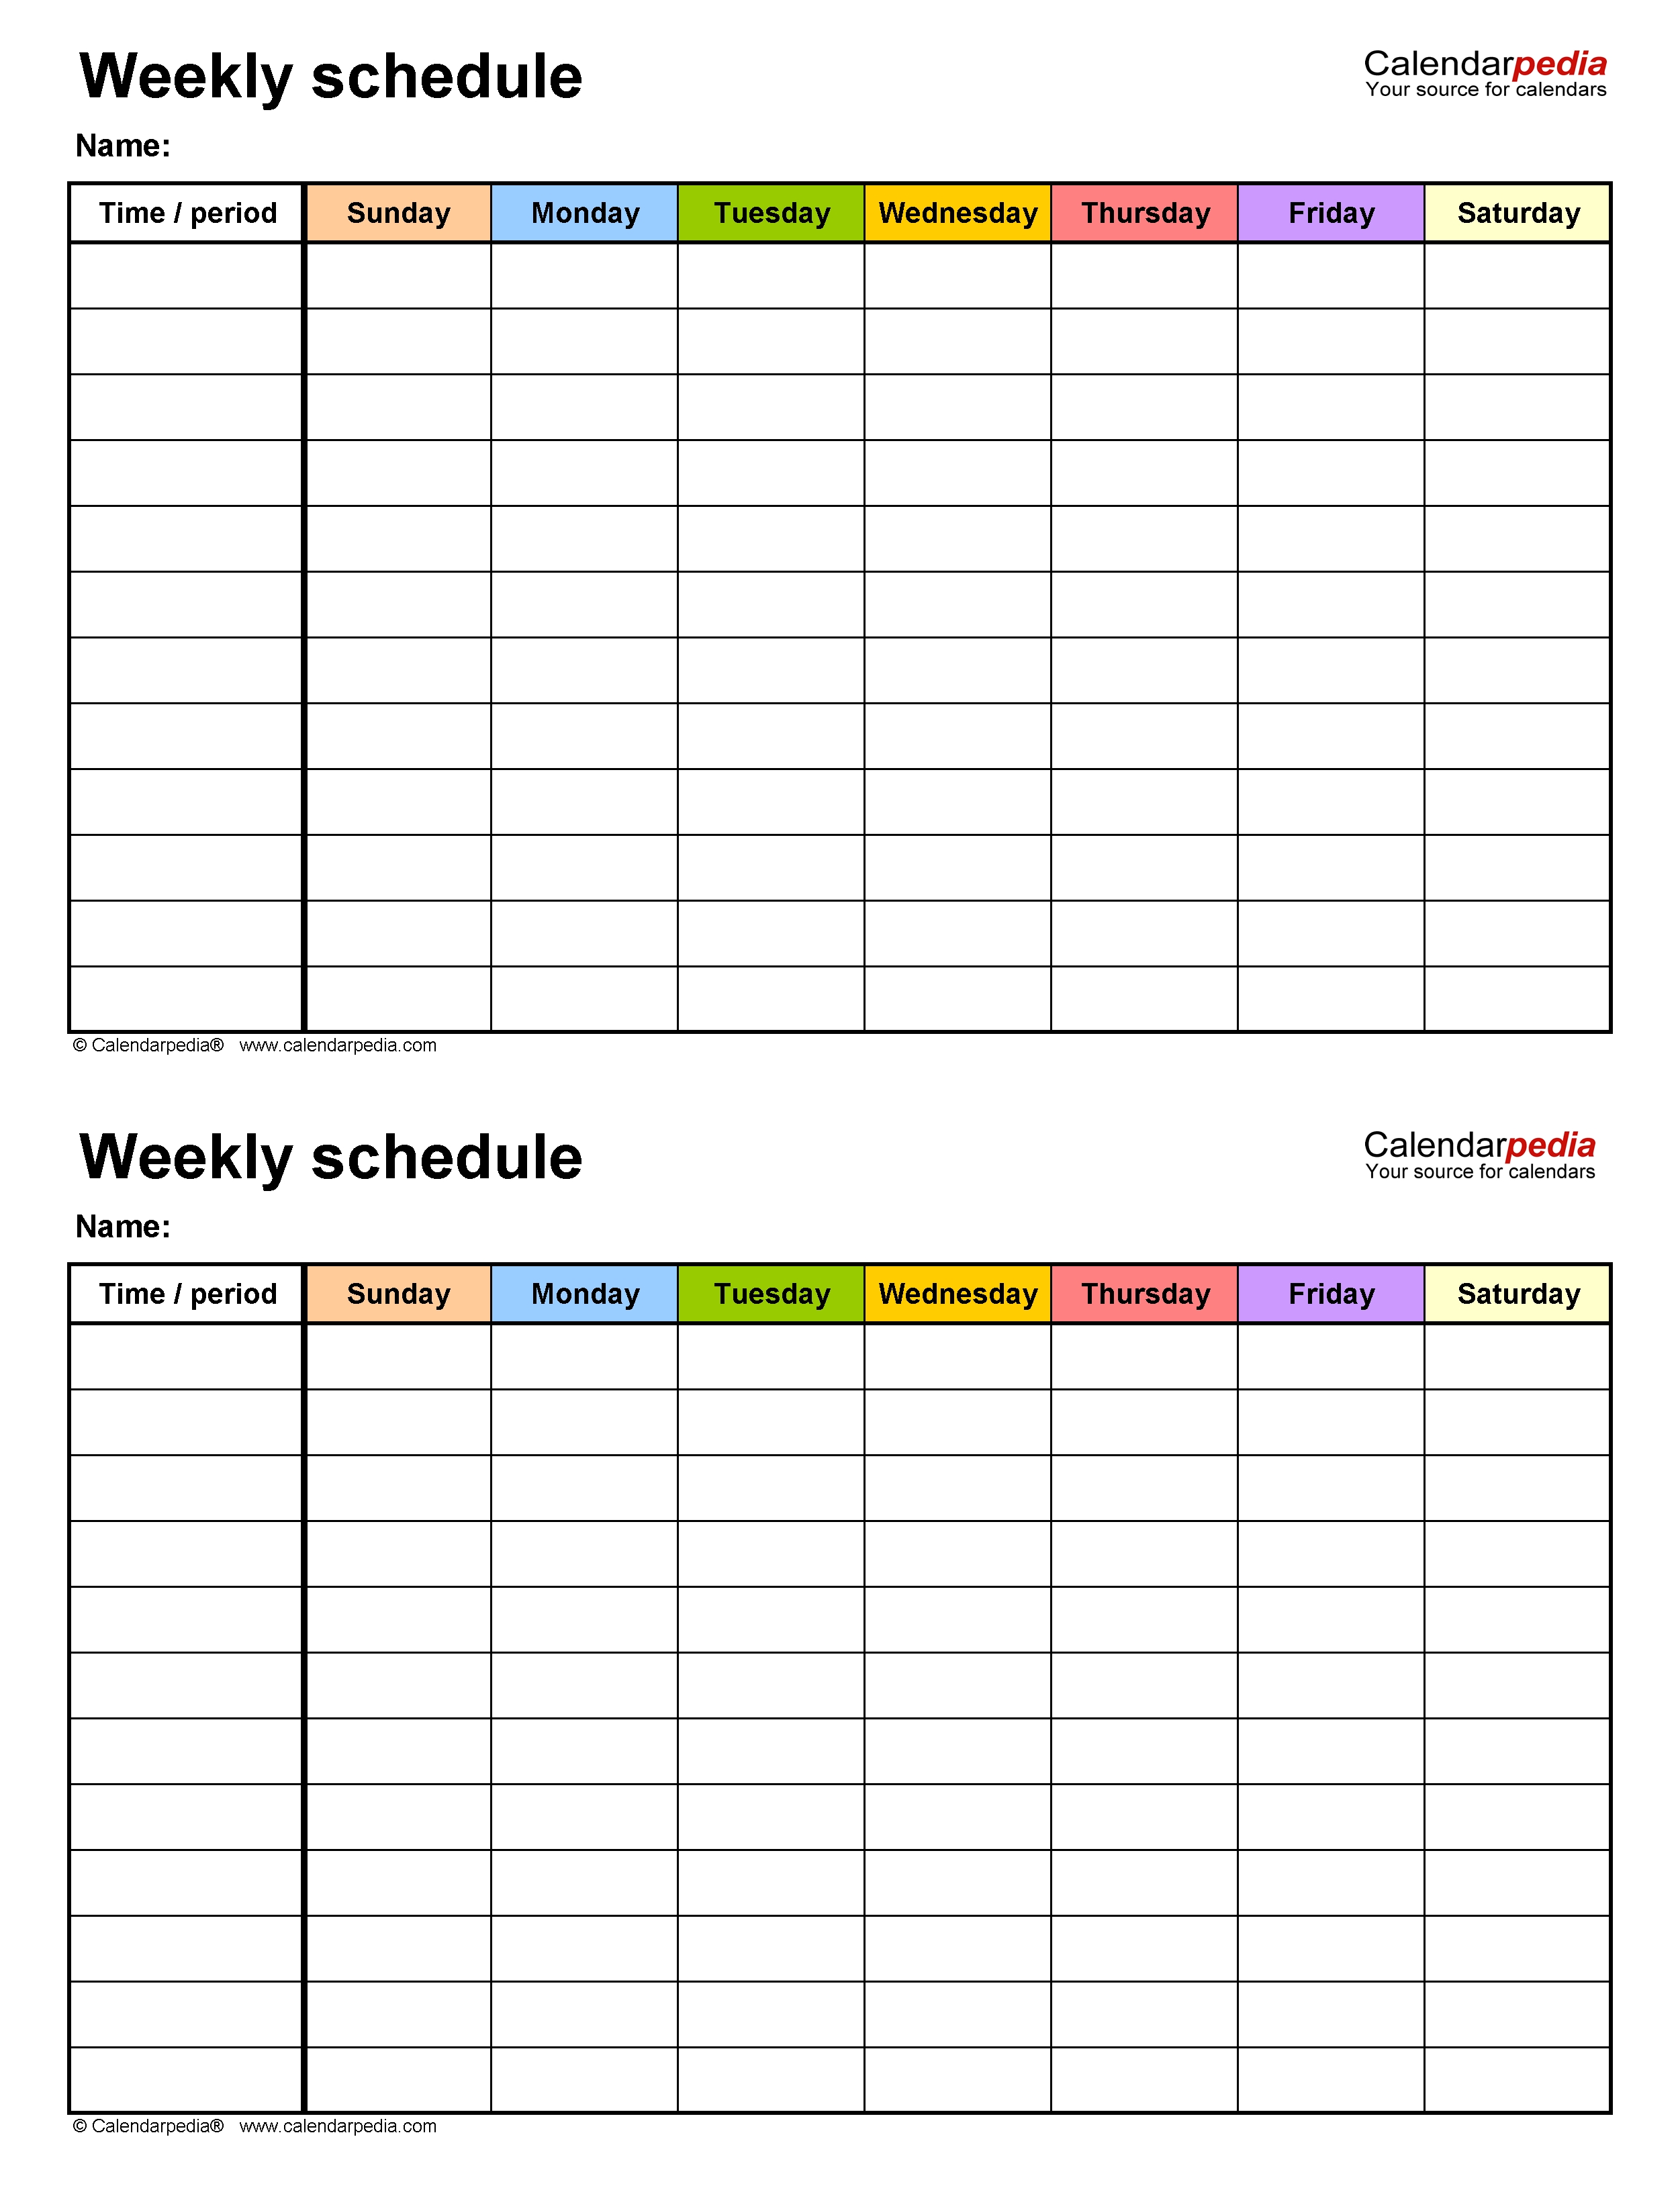 Free Weekly Schedule Templates For Excel - 18 Templates Free Calendar Schedule Template